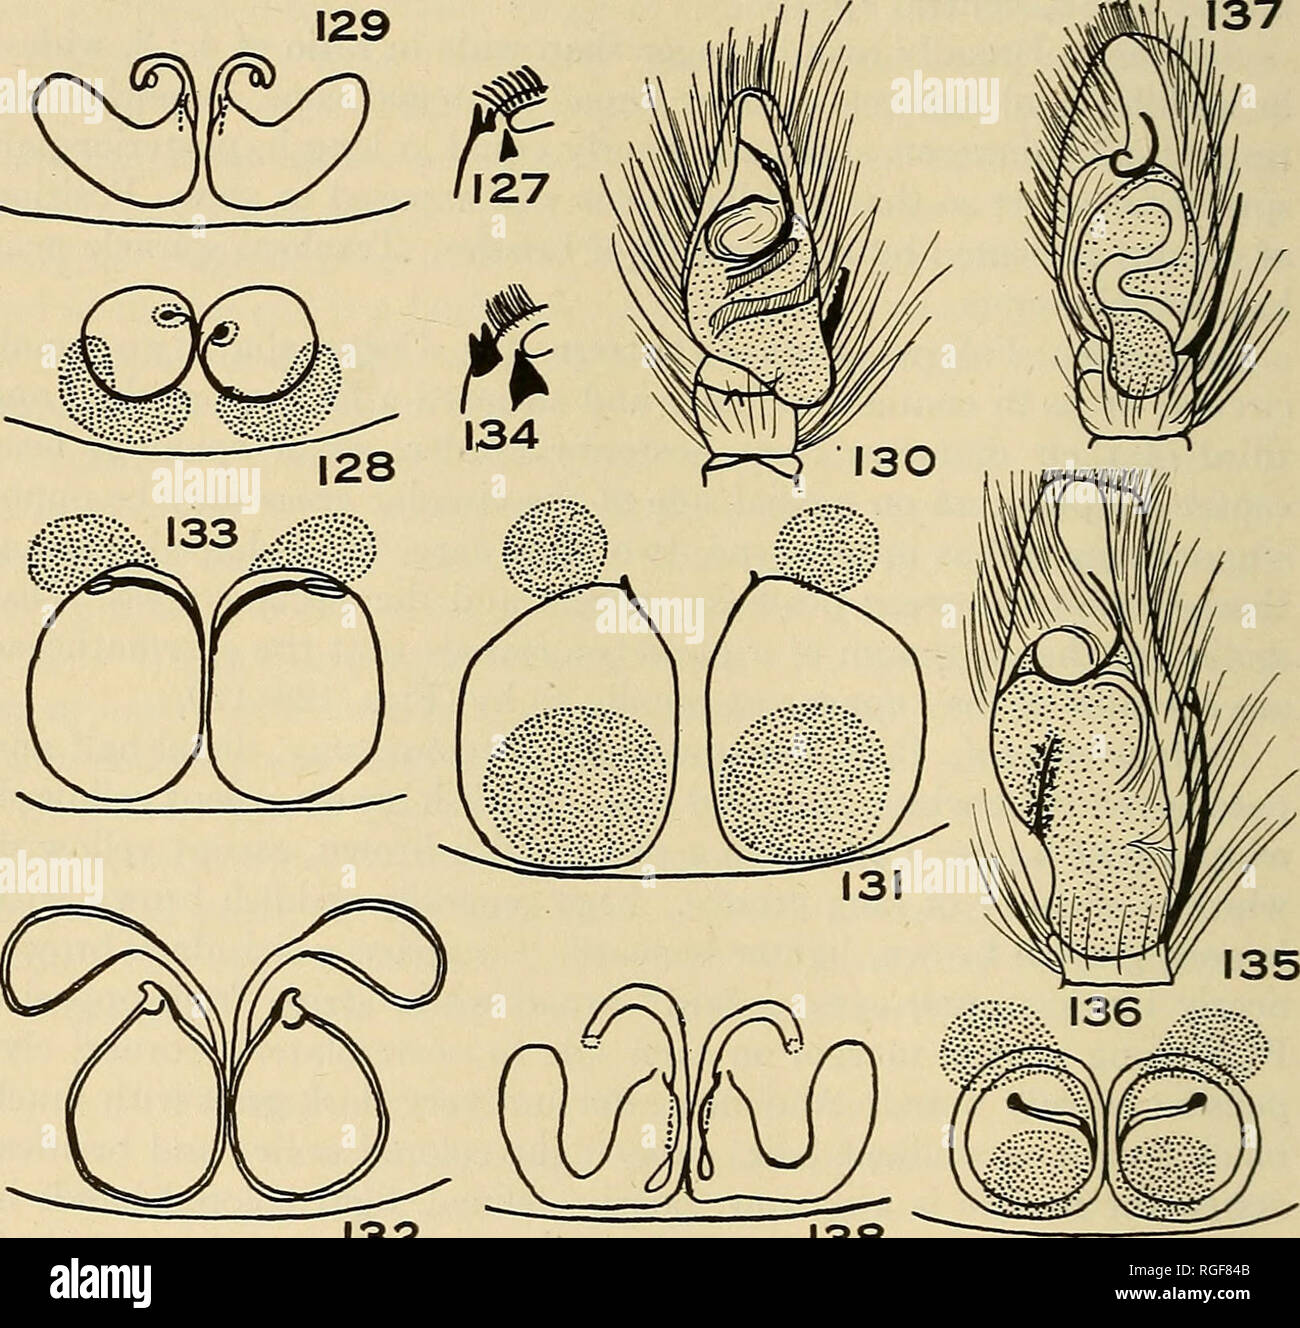 . Bulletin of the Museum of Comparative Zoology at Harvard College. Zoology. 144 bulletin: museum of comparative zoology 137. 132 138 External Anatomy of Spiders Fig. 127. Corythalia modesta Chickering; female cheliceral teeth. Figs. 128-129. C. modesta Chickering; epigynum, ventral view, and dissected, viewed from within. Fig. 130. Corythalia obsoleta, male palp, ventral view. Figs. 131-132. C. obsoleta, epigynum, ventral view, and dissected, viewed from within. Fig. 133. Corythalia panamana, epigynum, ventral view. Fig. 134. Corythalia parvula, male cheliceral teeth. Fig. 135. C. parvula, ma Stock Photo